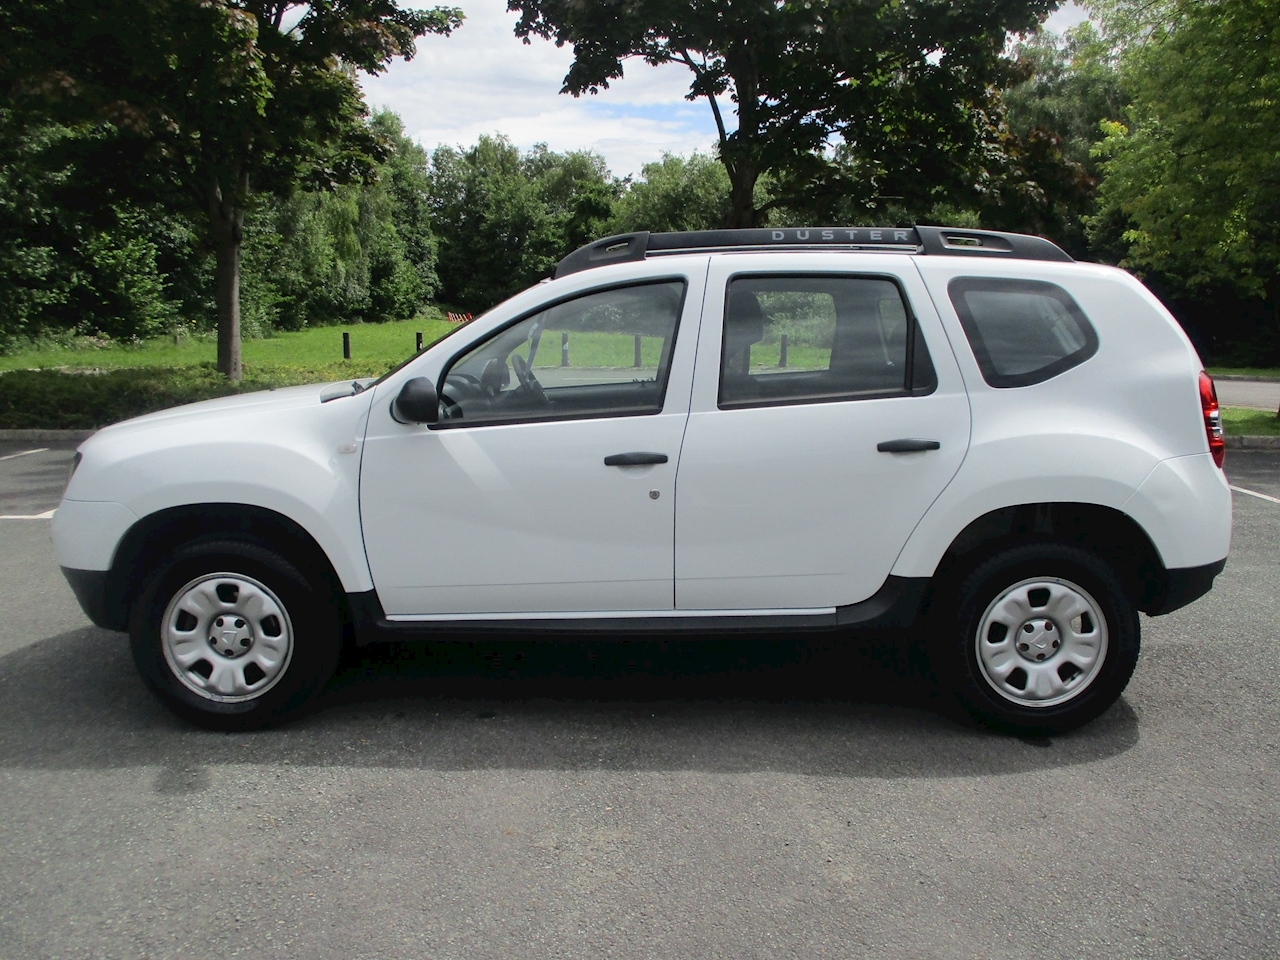 Duster Ambiance SUV 1.5 Manual Diesel